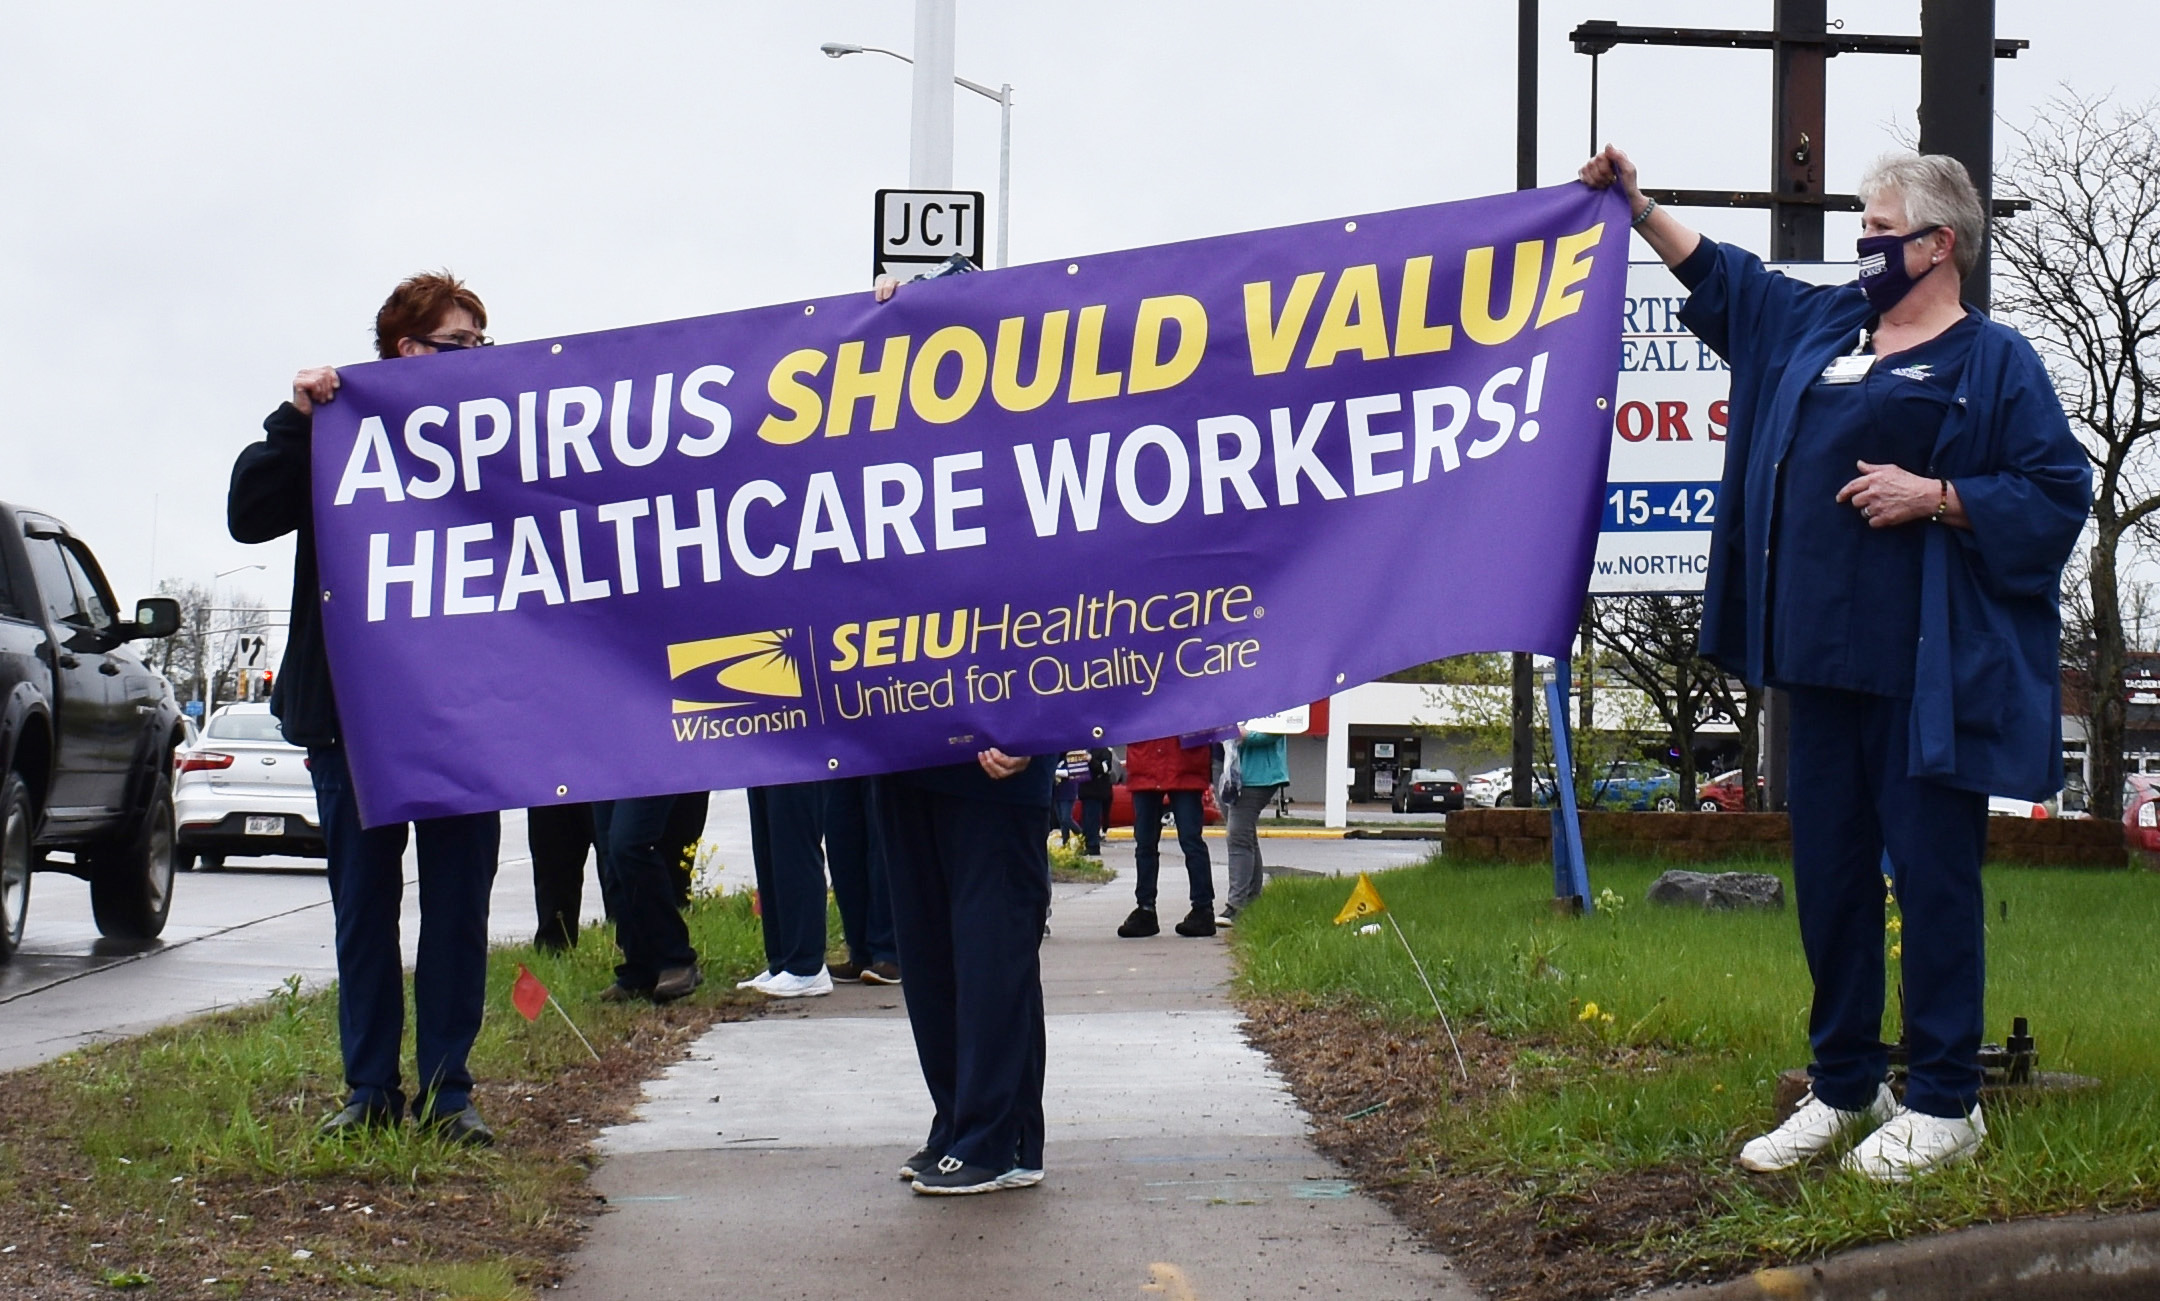 Sarah Von Loh and Eve Mork hold a sign reading "Aspirus should value healthcare workers!" at a rally in Wisconsin Rapids